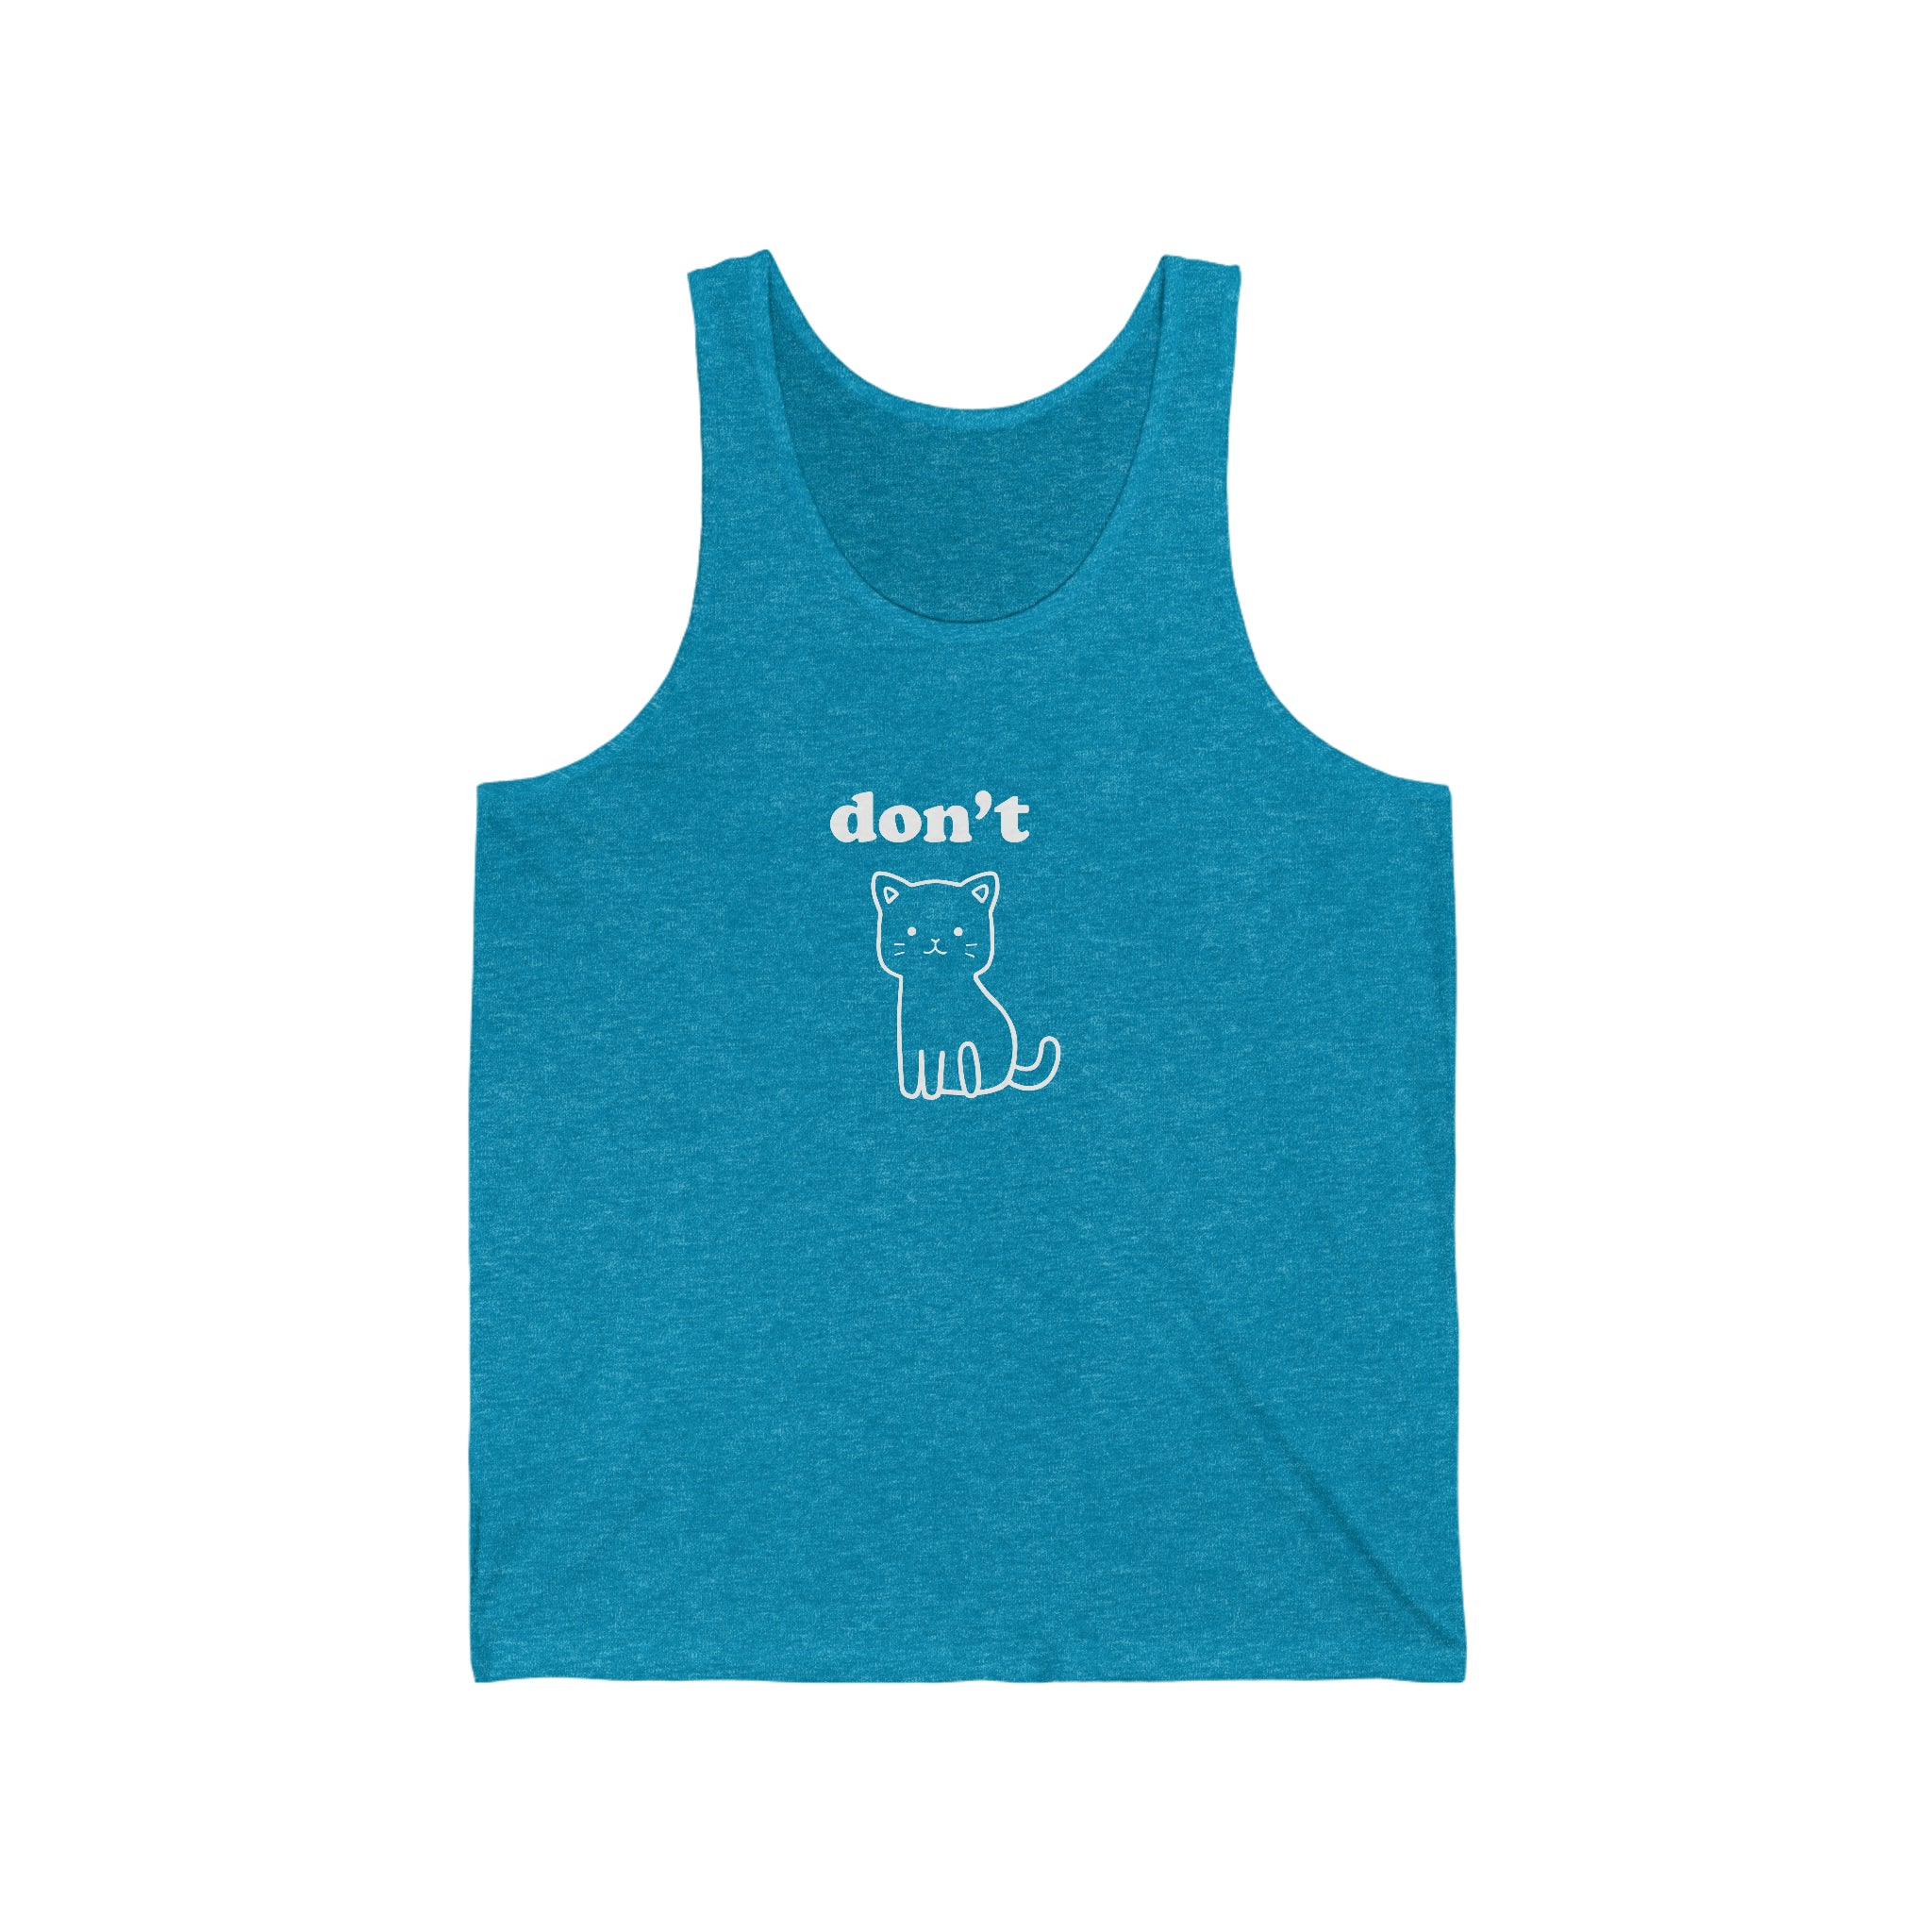 Don't Kitty : Unisex Cotton Tank Top by Bella+Canvas